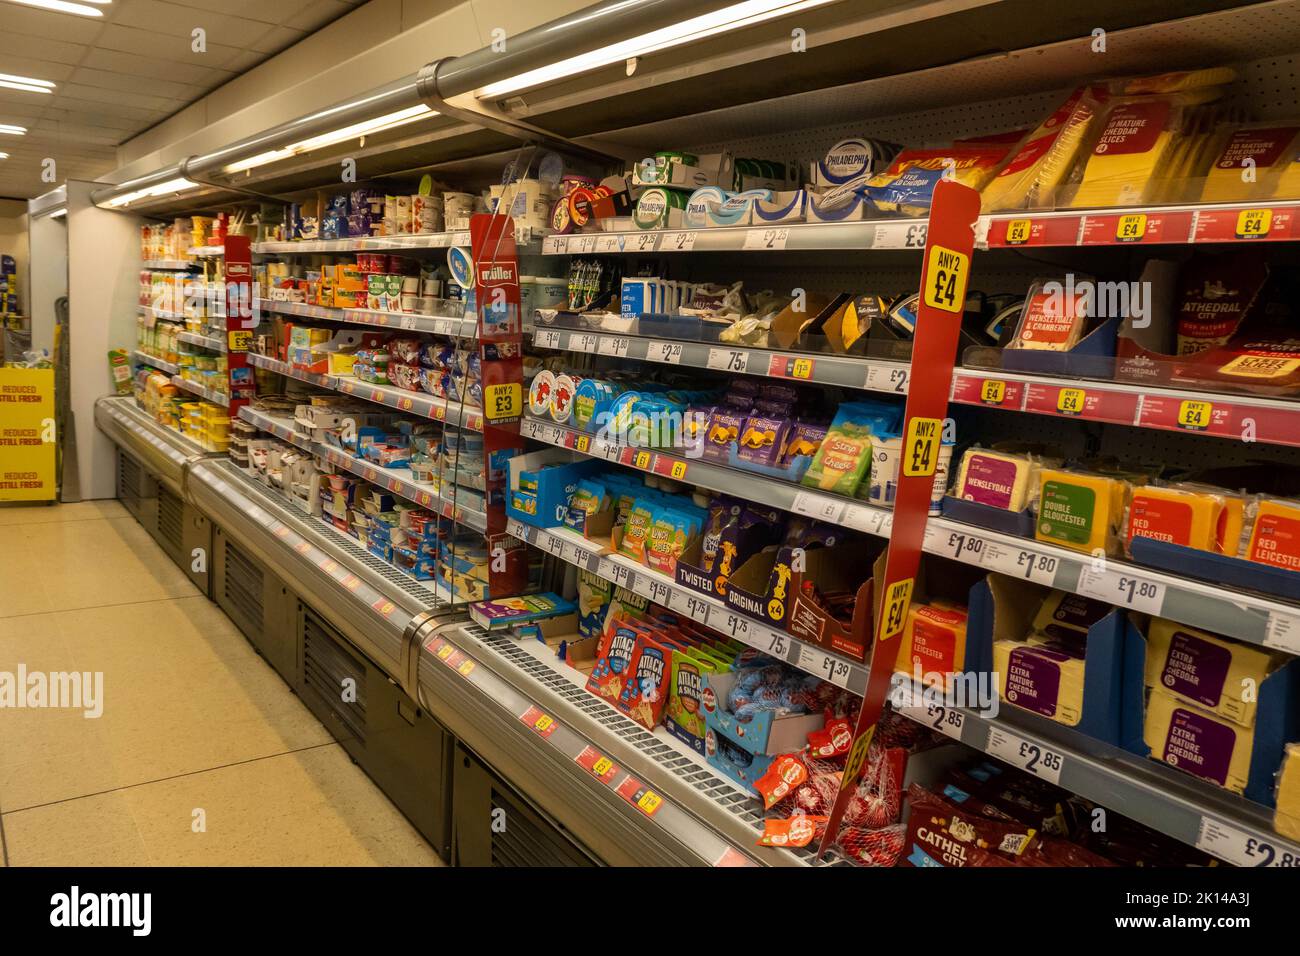 A view of Iceland supermarket isles at the cromer store. Stock Photo